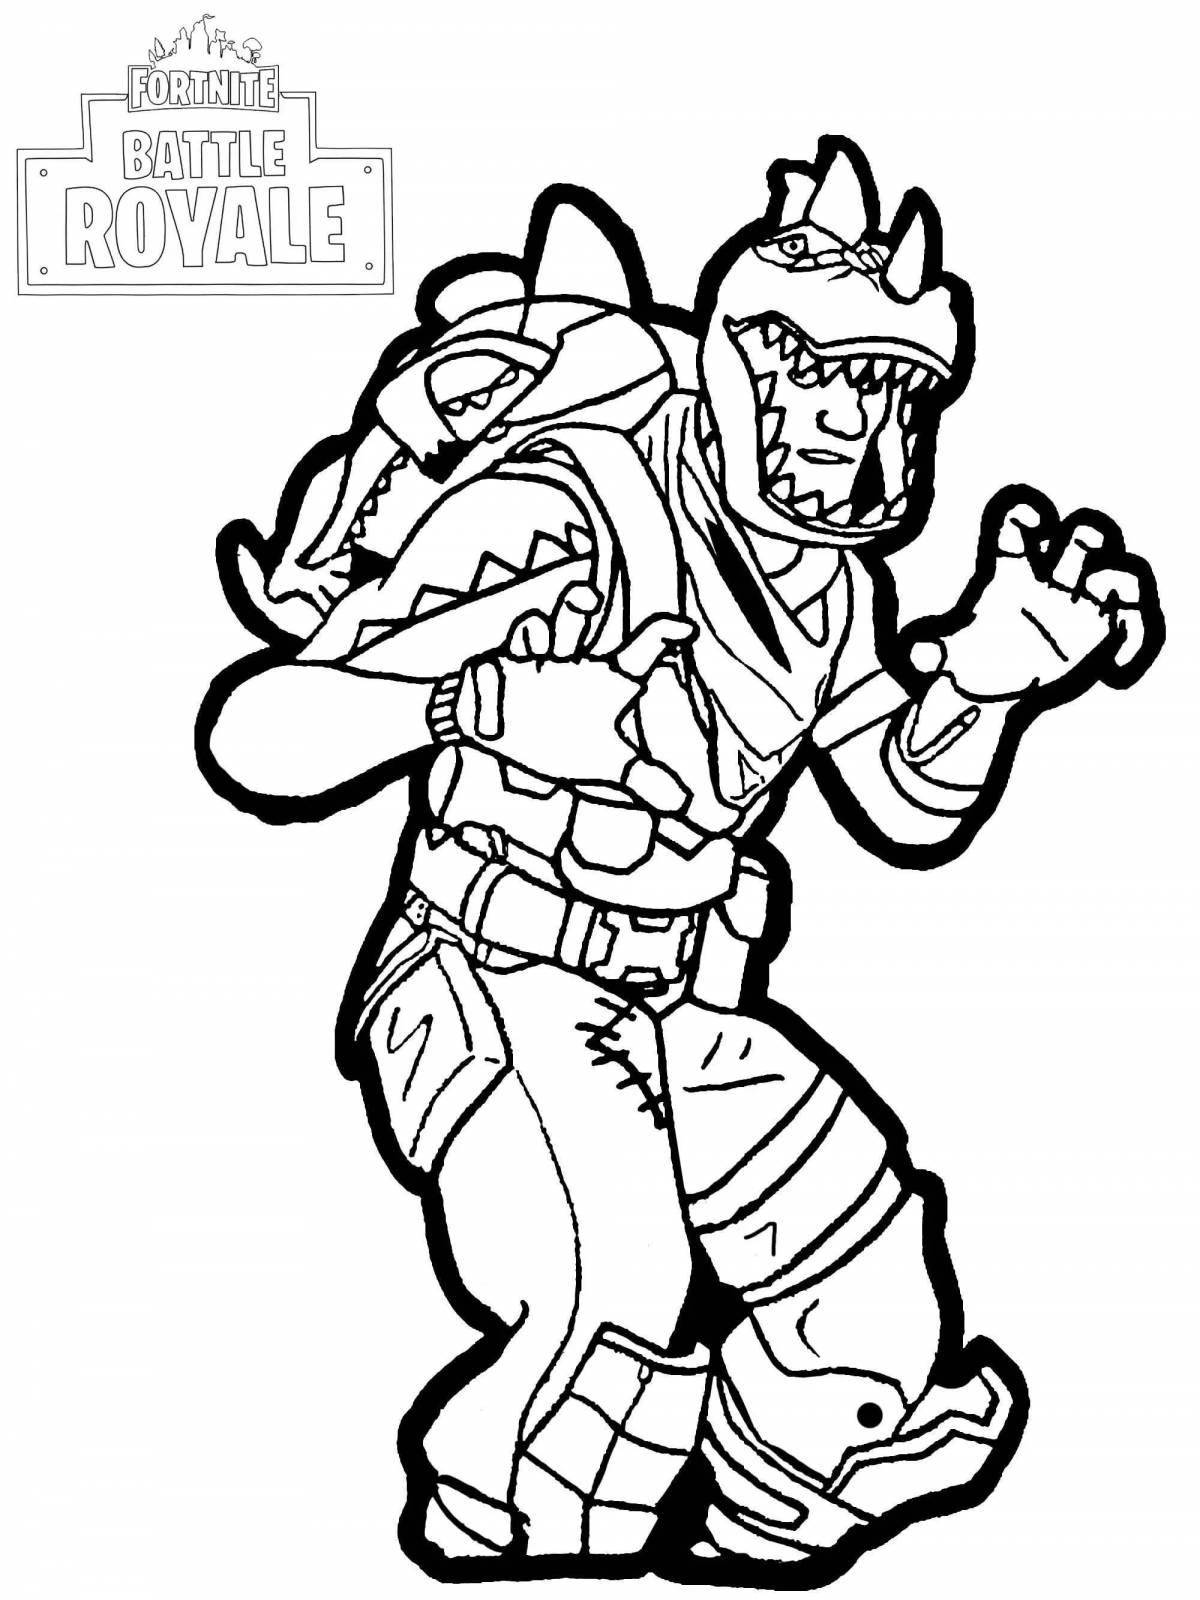 Fortnite bold battle coloring page